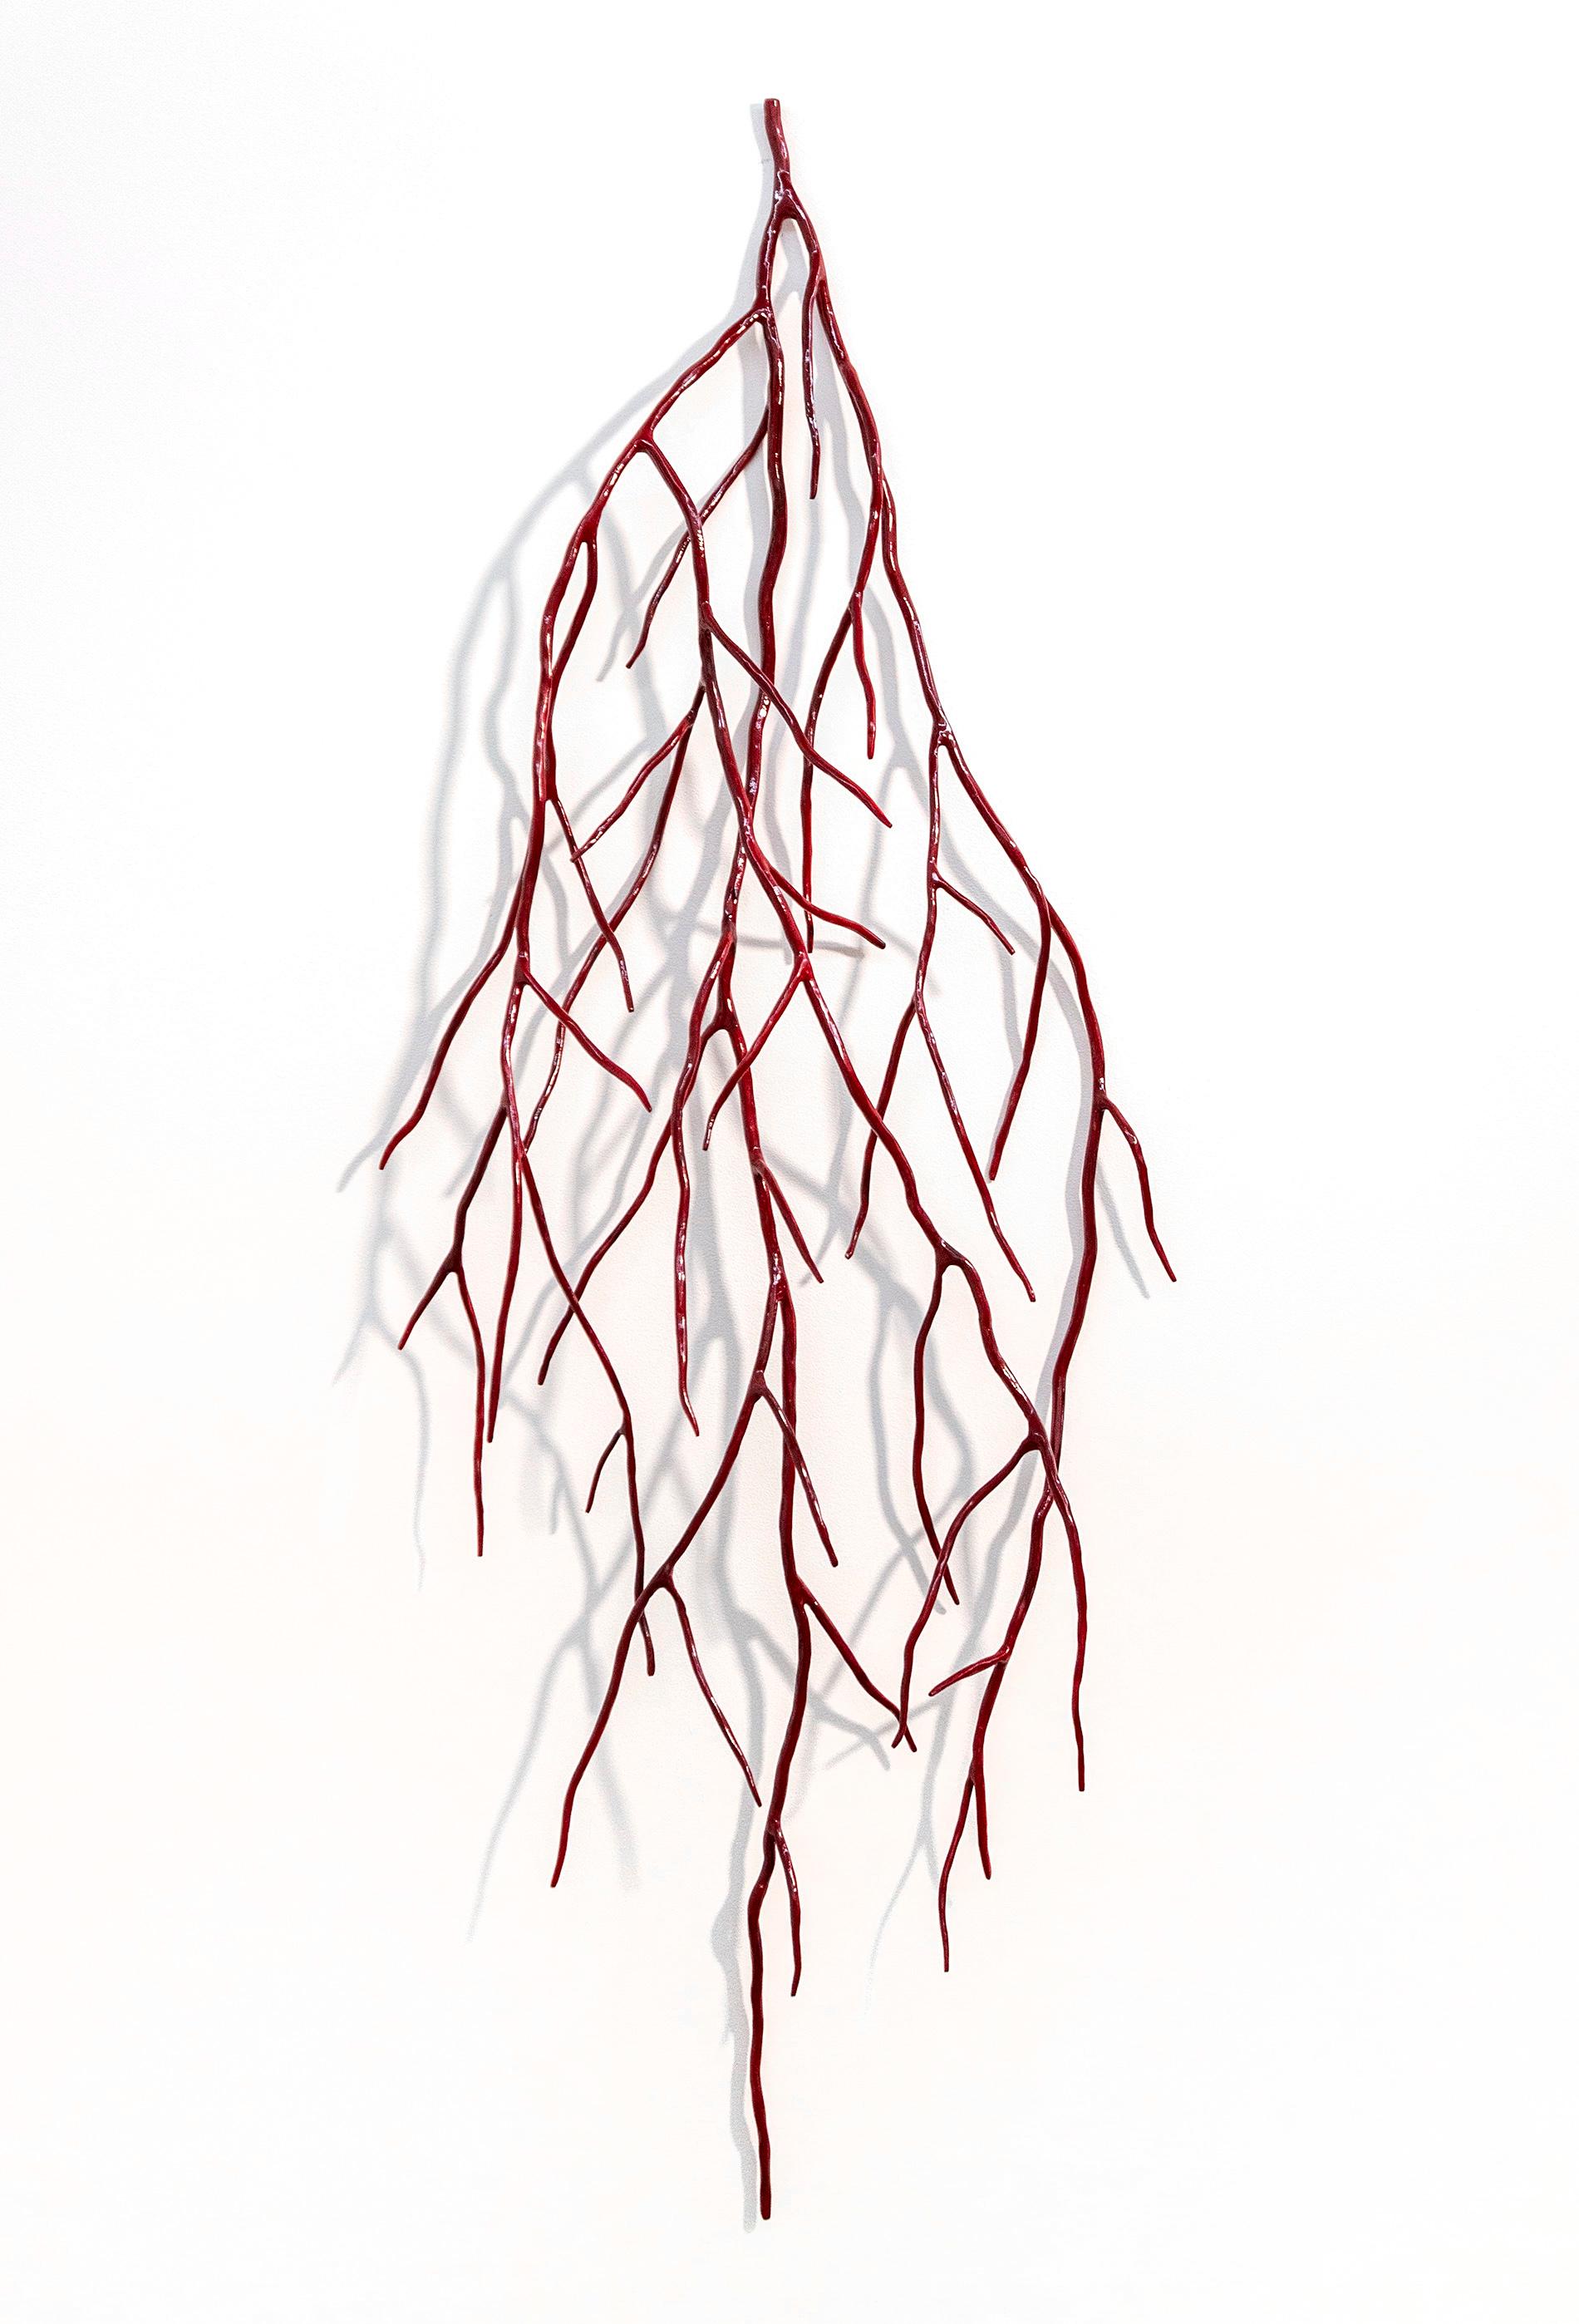 Shayne Dark Abstract Sculpture - Red Bough - bright, contemporary, powder coated steel, wall sculpture